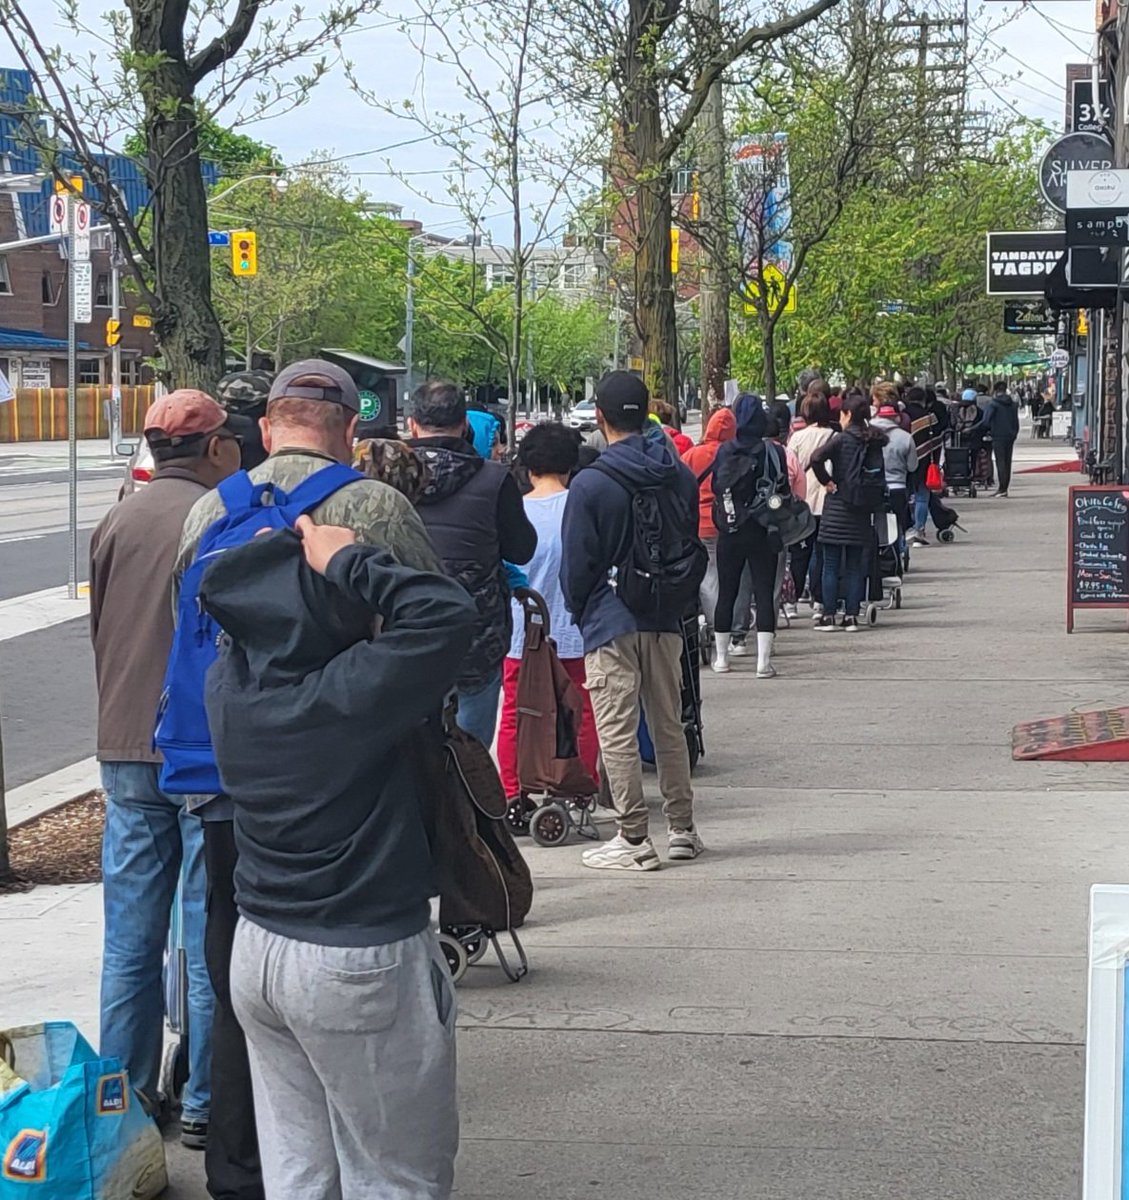 Lineup at the Fort York Food Bank this morning. It's an entire block long. This is Chrystia Freeland's riding. For shame.